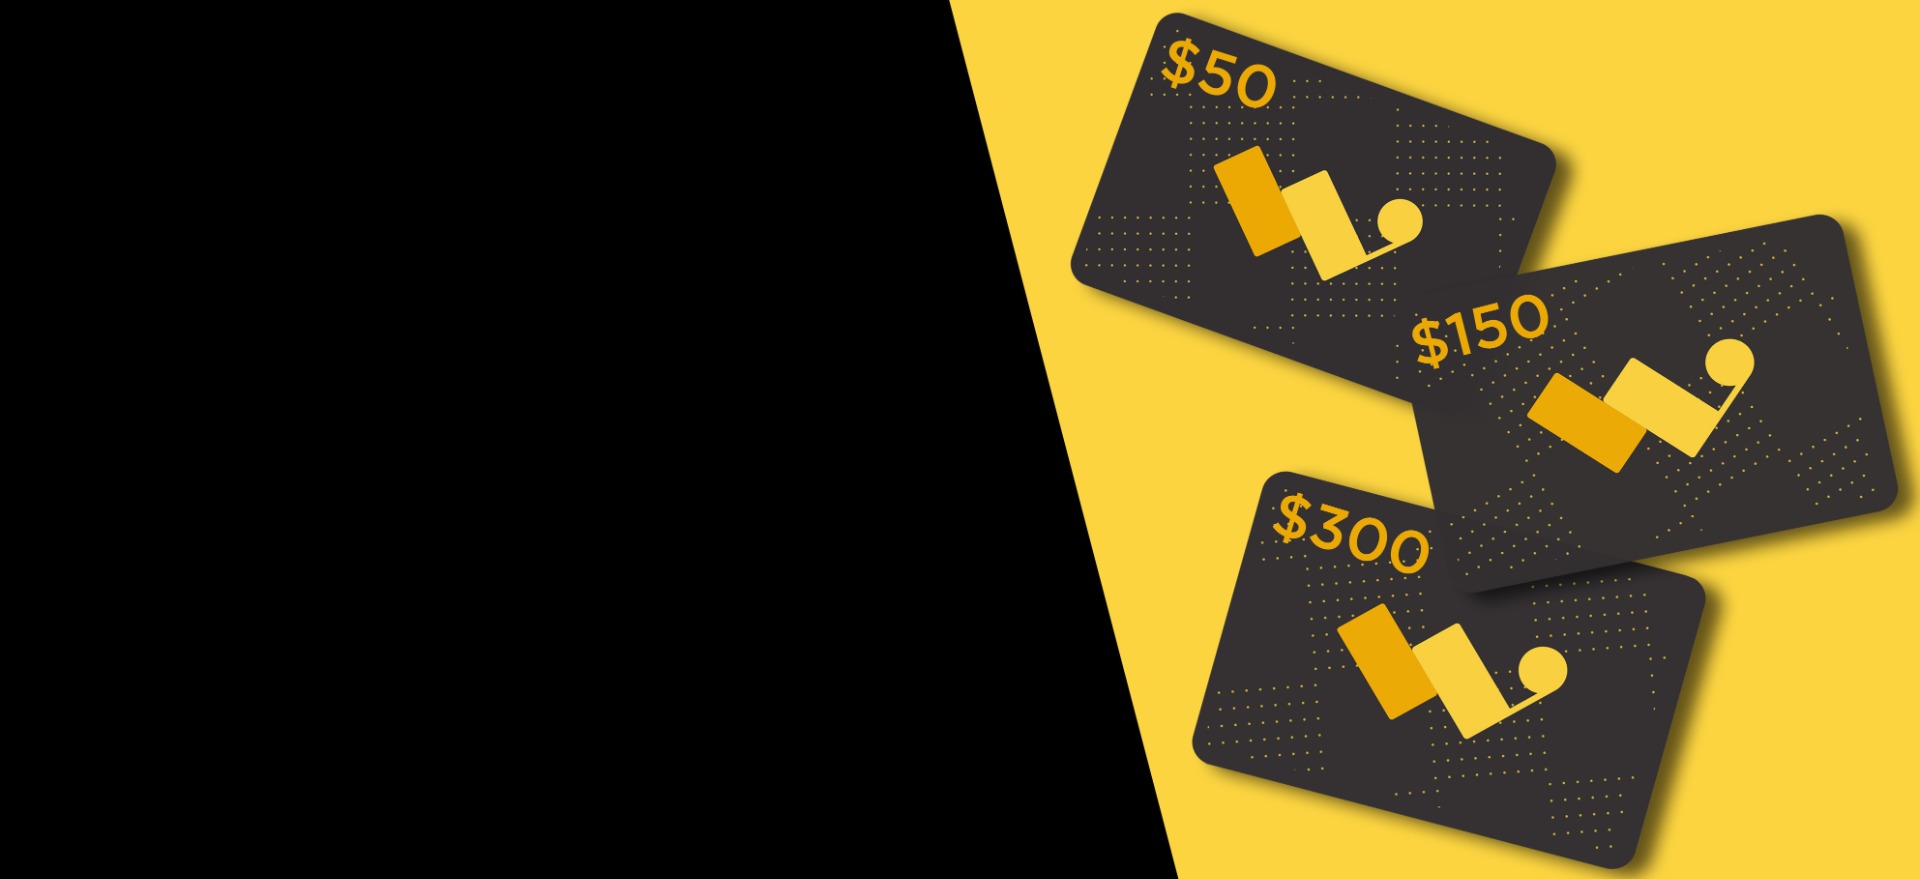 W Store gift cards for $50, $150 and $300